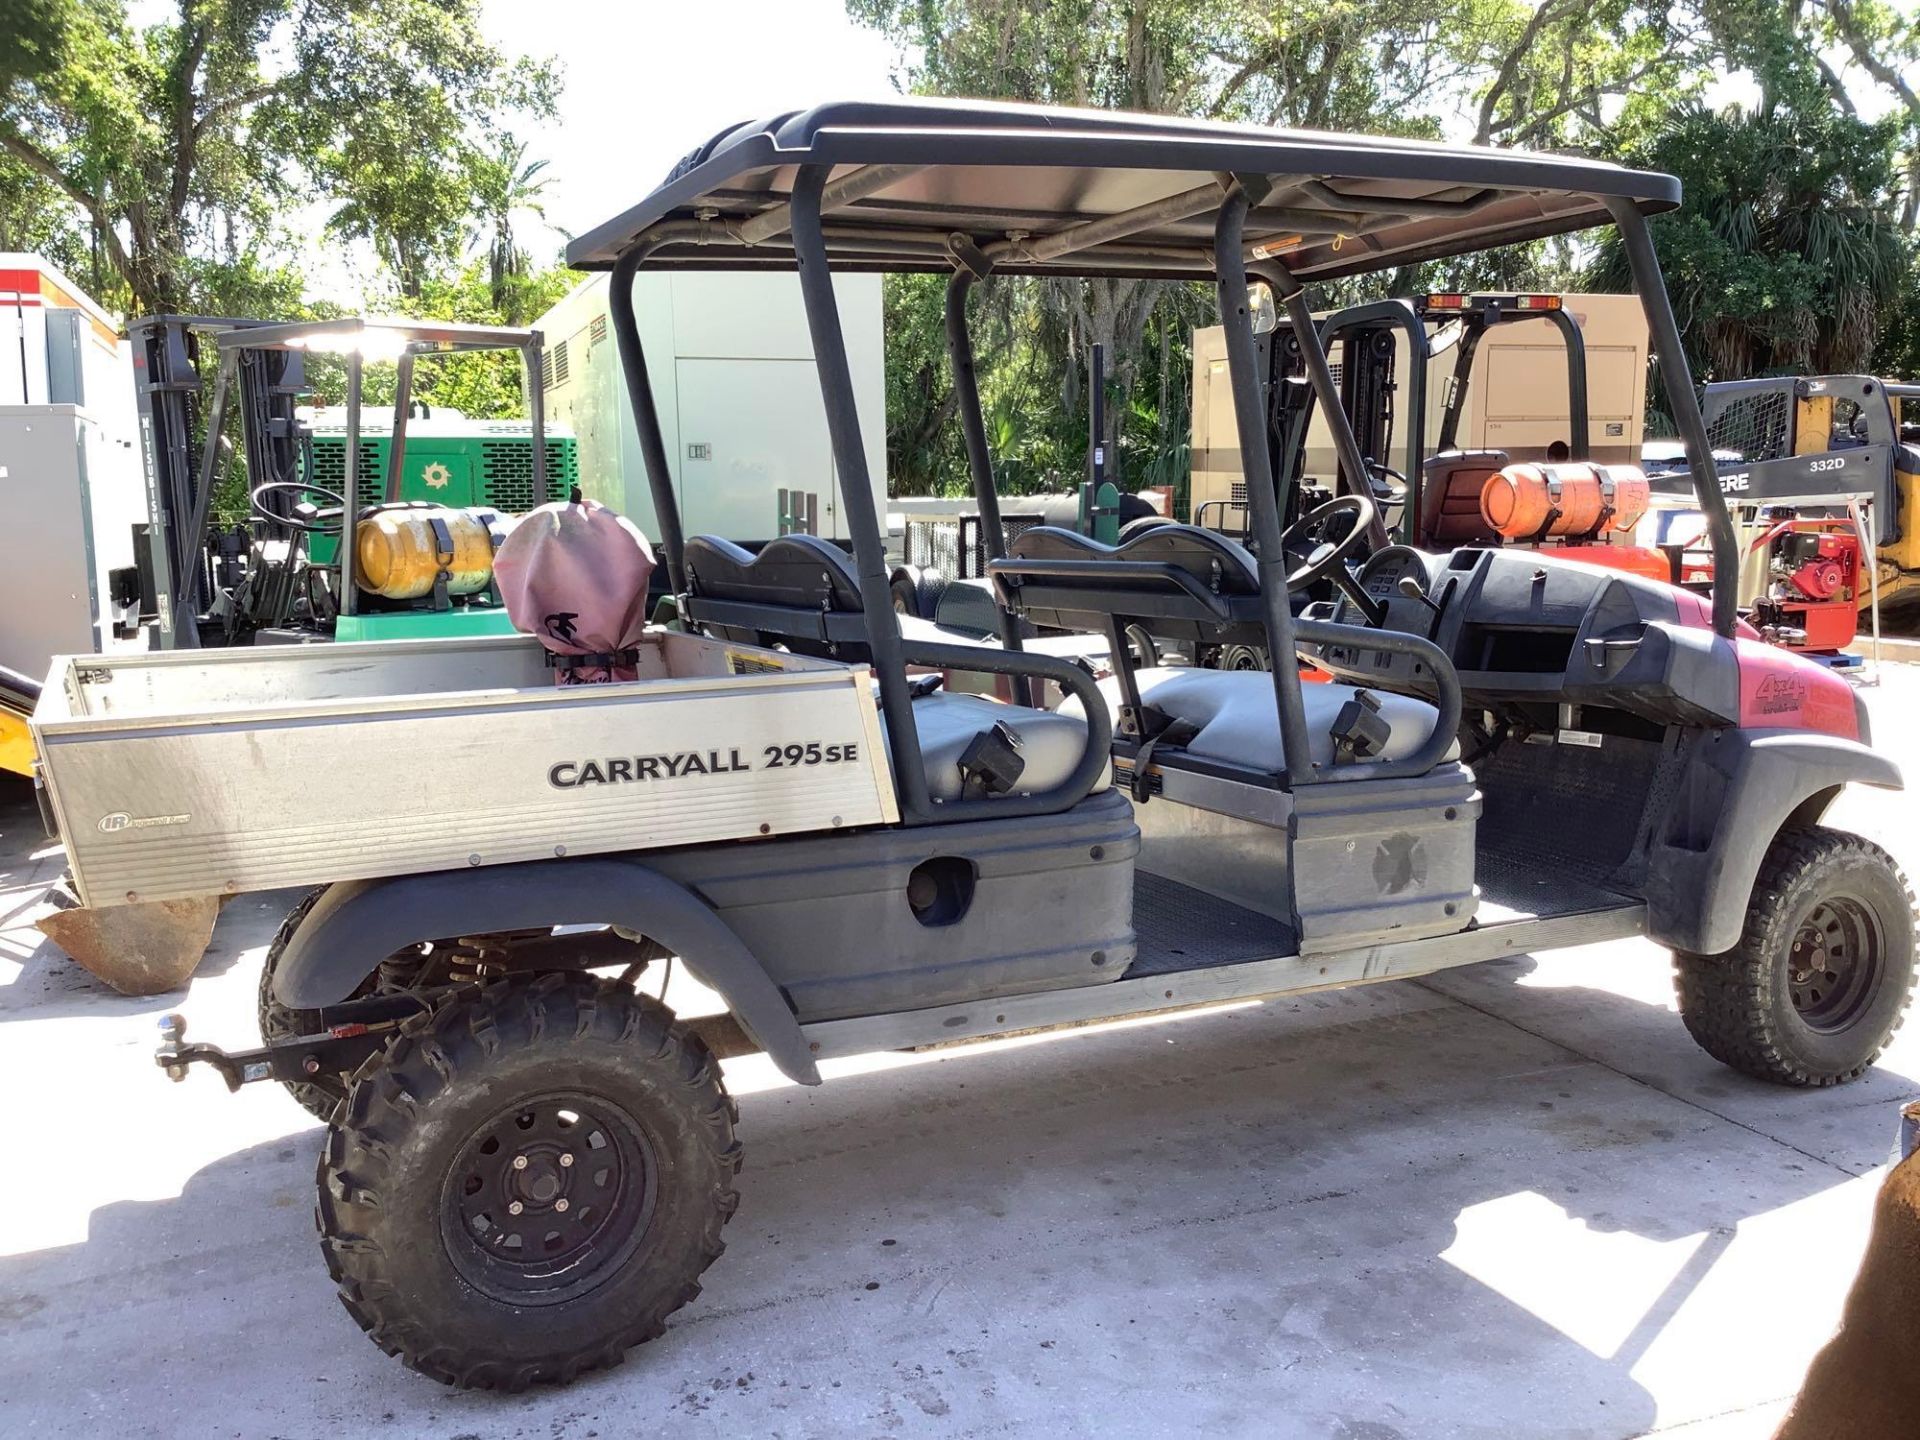 CLUB CAR CARYALL 295SE 4x4 INTELLITRAK GOLF CART, GAS POWERED , MANUAL DUMP BED, HITCH IN FRONT & BA - Image 4 of 19